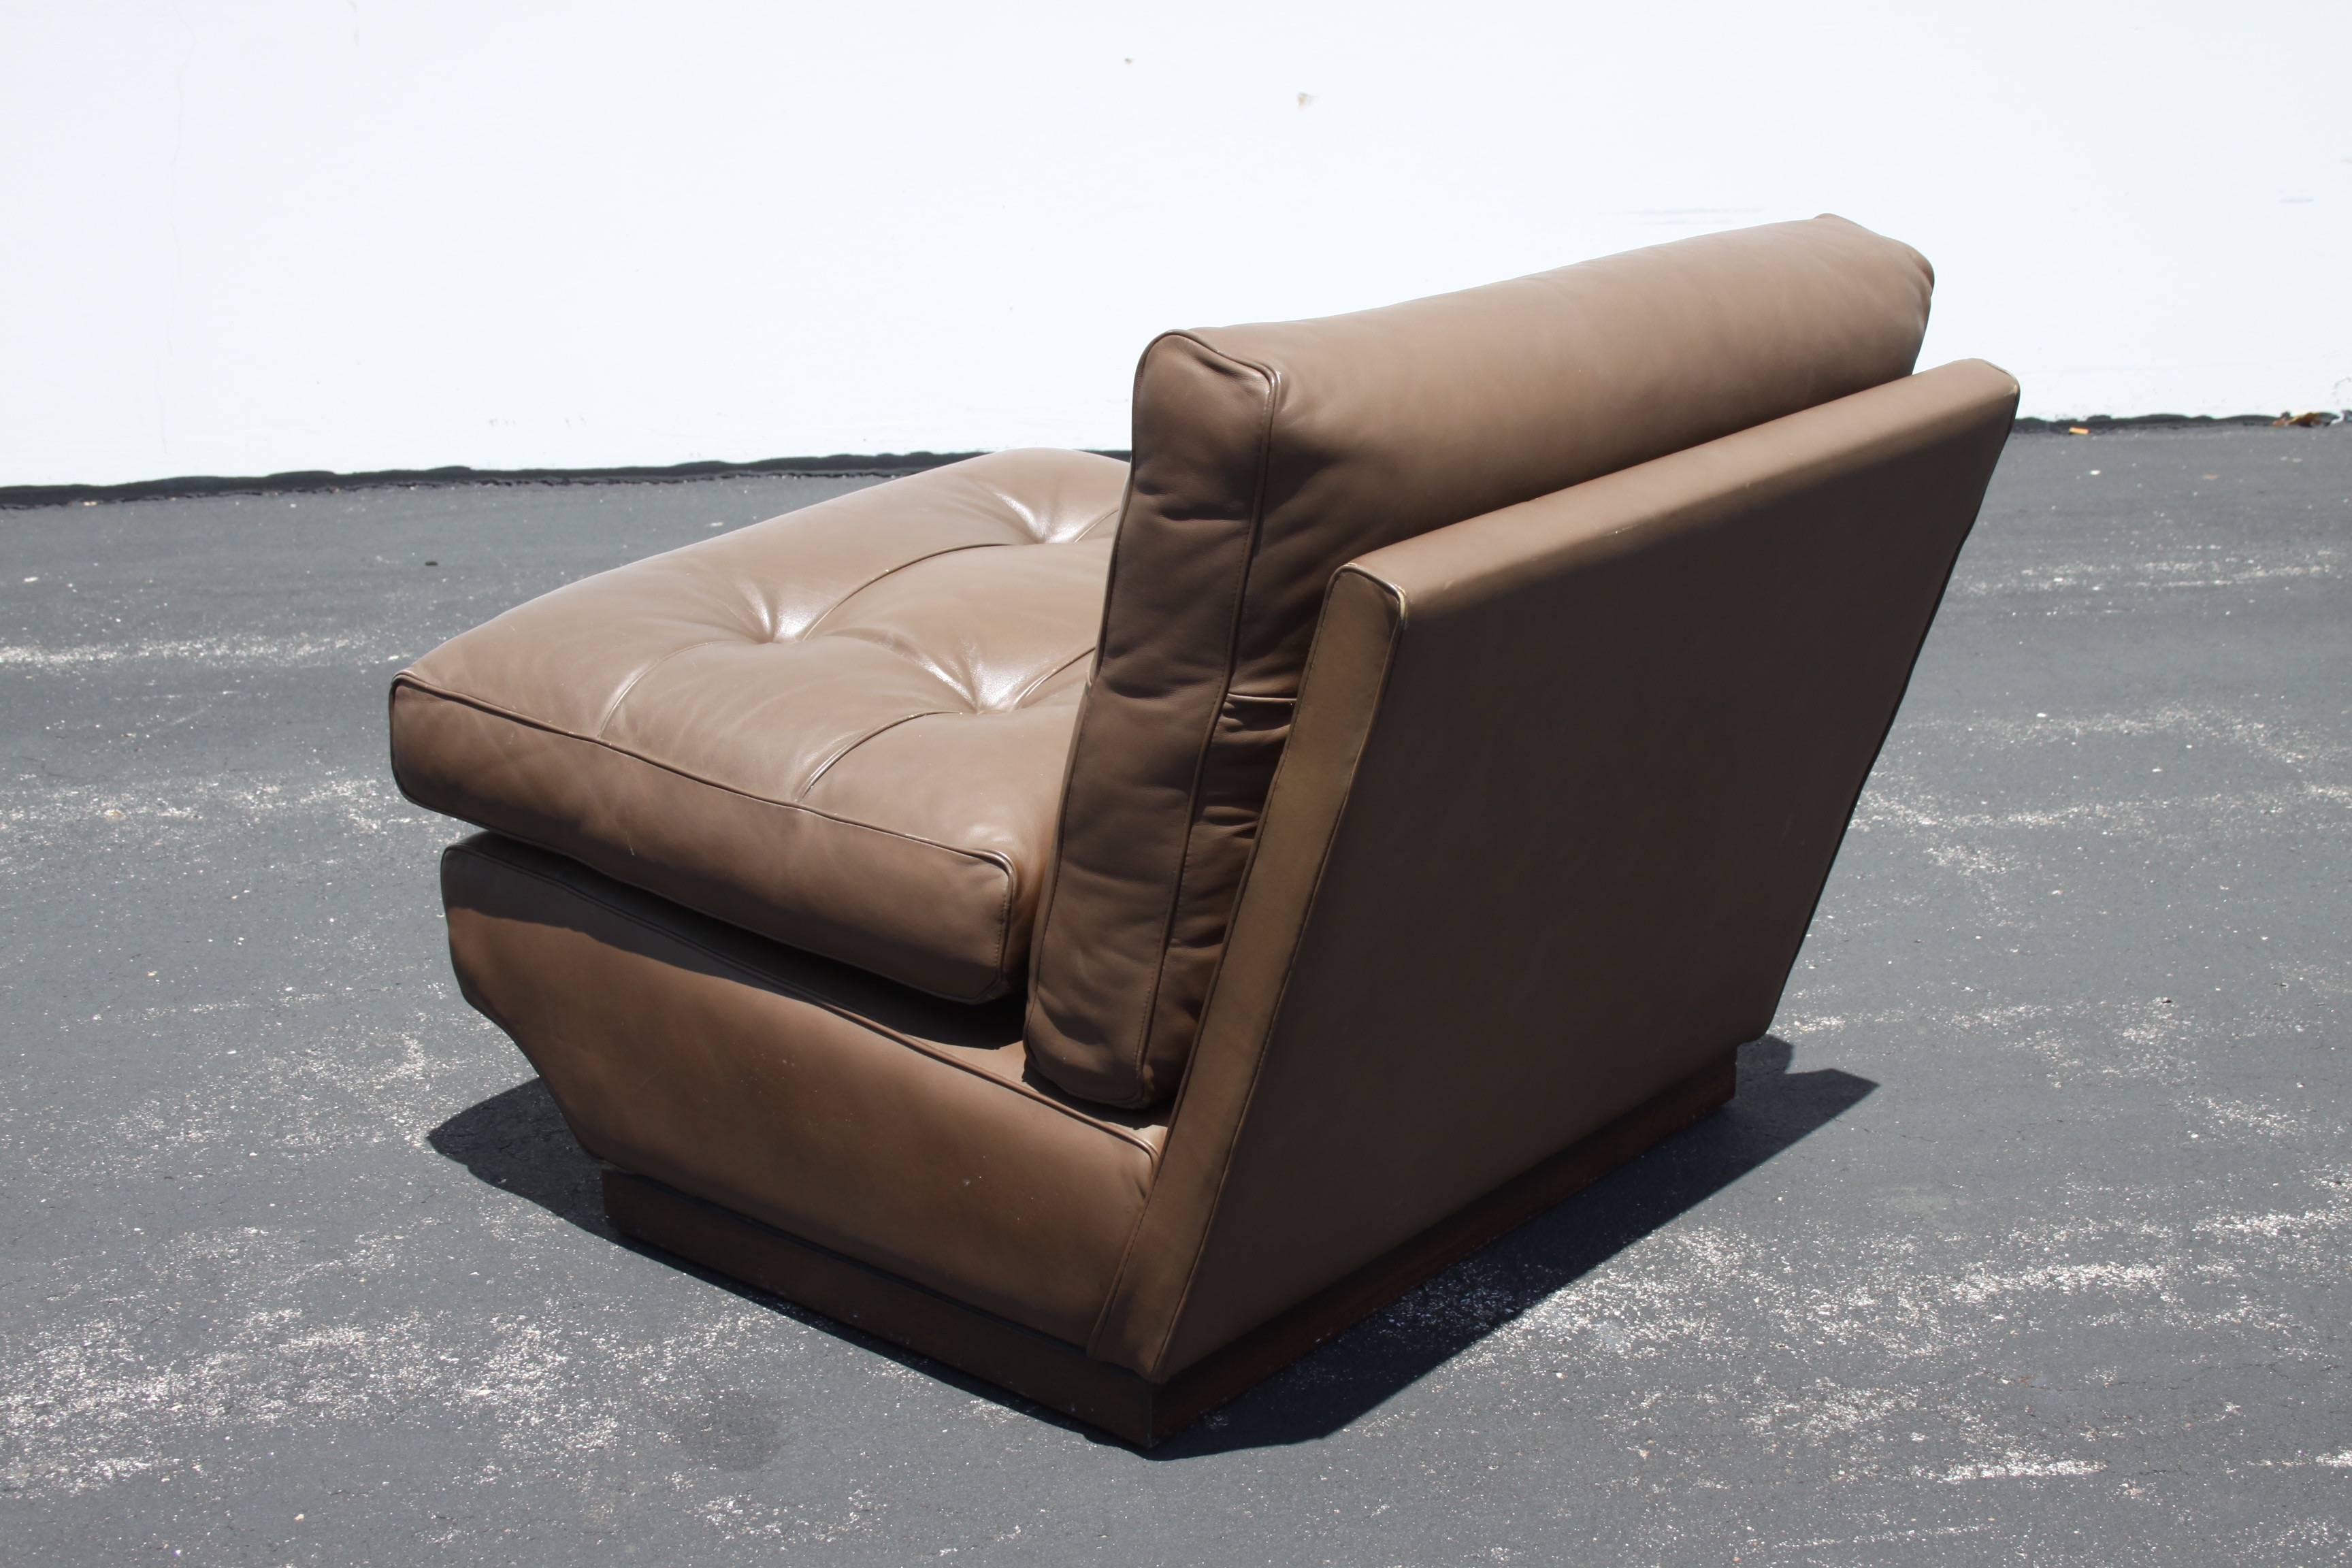 Pair of Mario Bellini brown leather tufted lounge chairs for B&B Italia on wood frames, designed in the 1960s. Imported by Atelier International, LTD. Leather has minor scuffs, overall very nice condition.